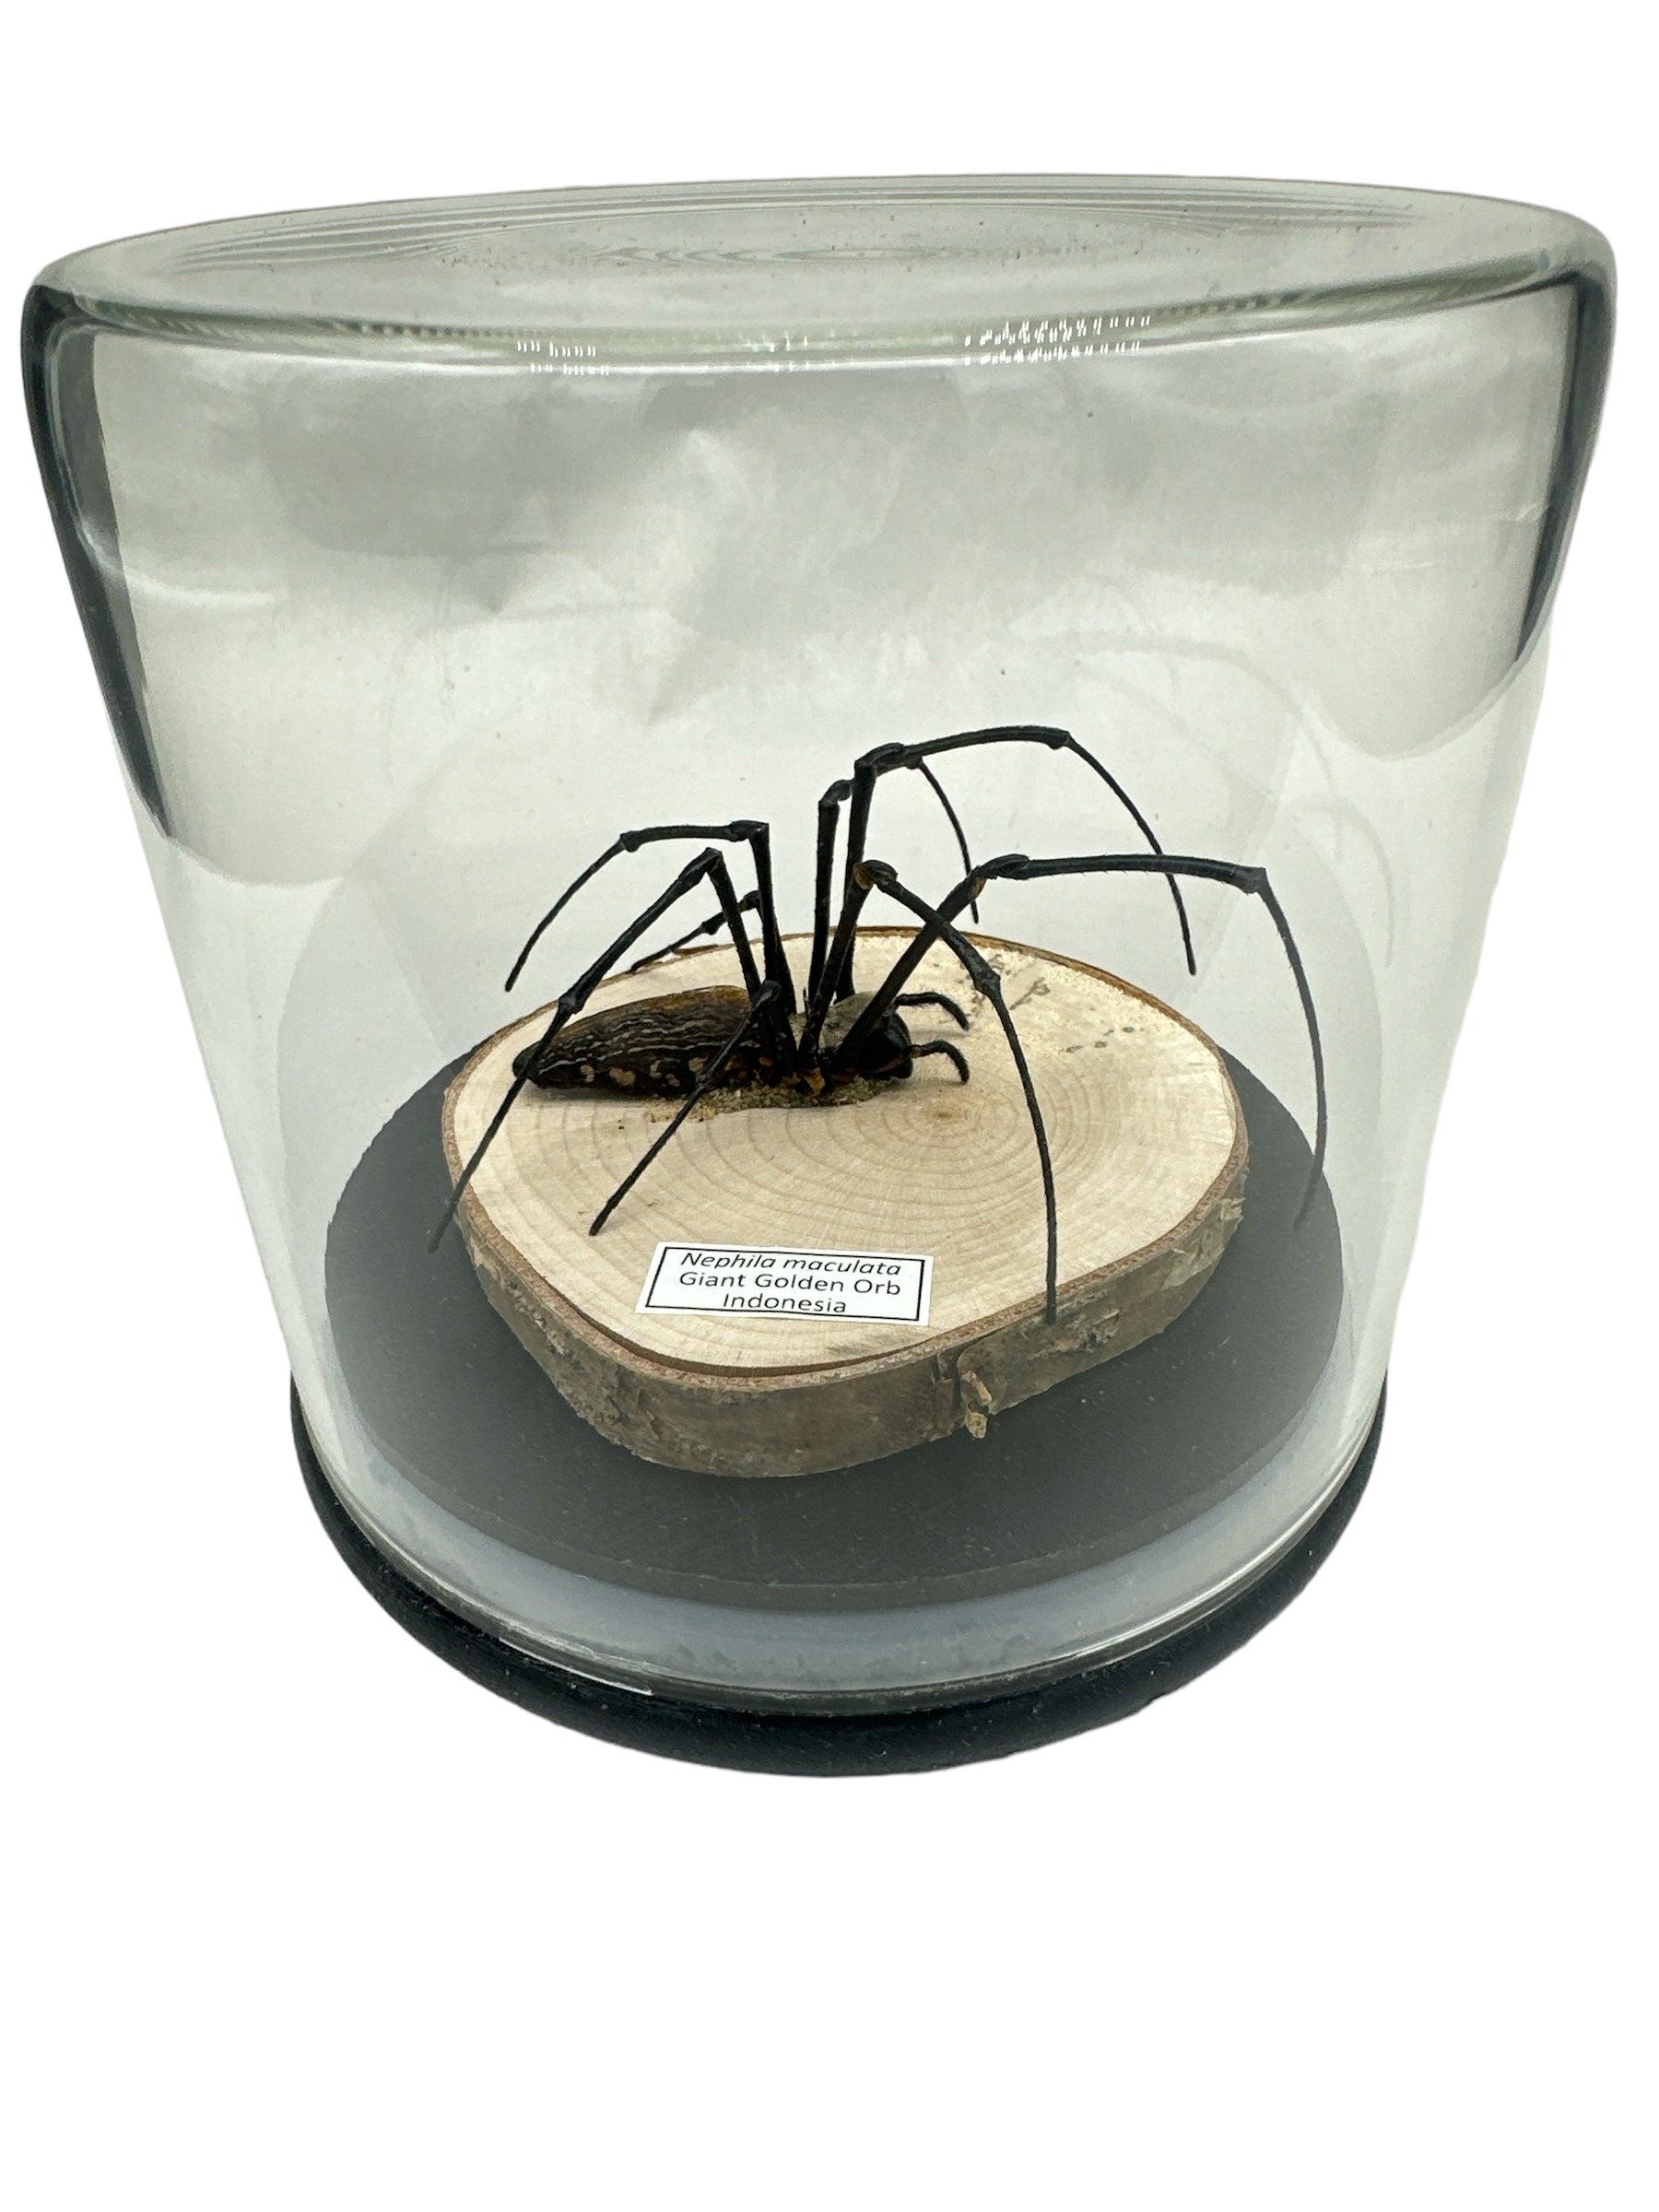 Giant Golden Orb Weaber (Nephila maculata) - Glass Dome - Large